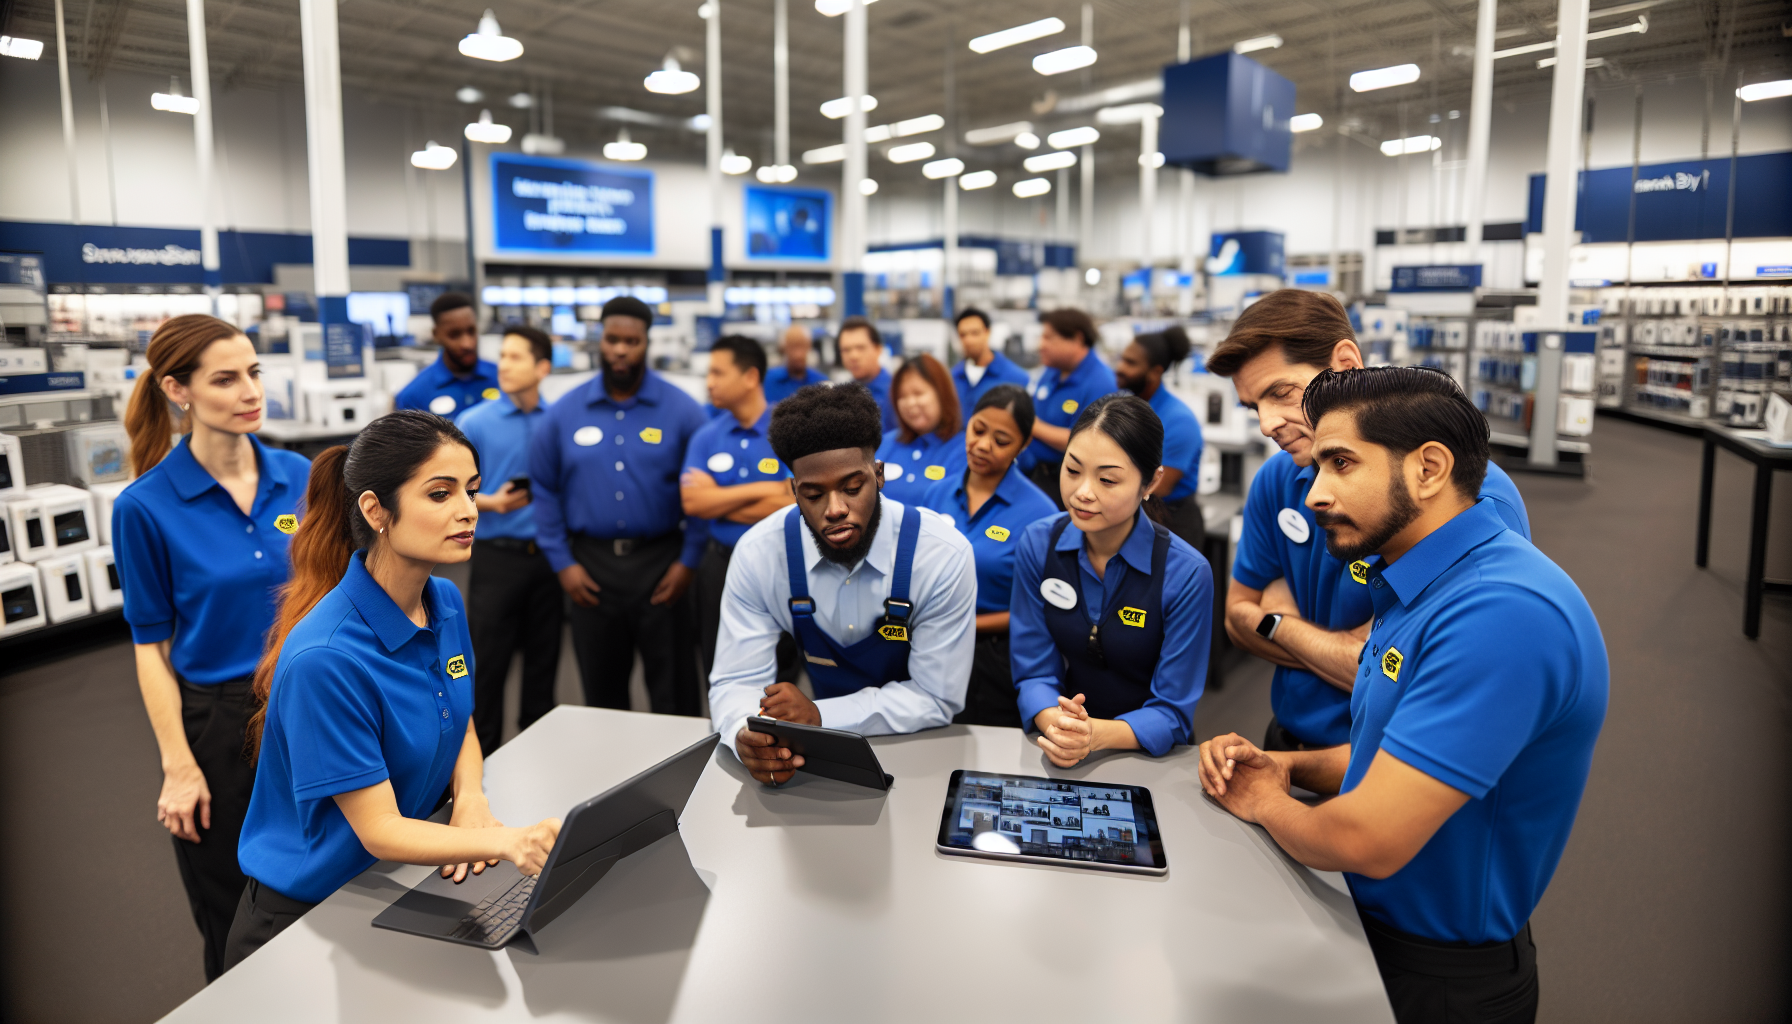 Employee training and development at Best Buy